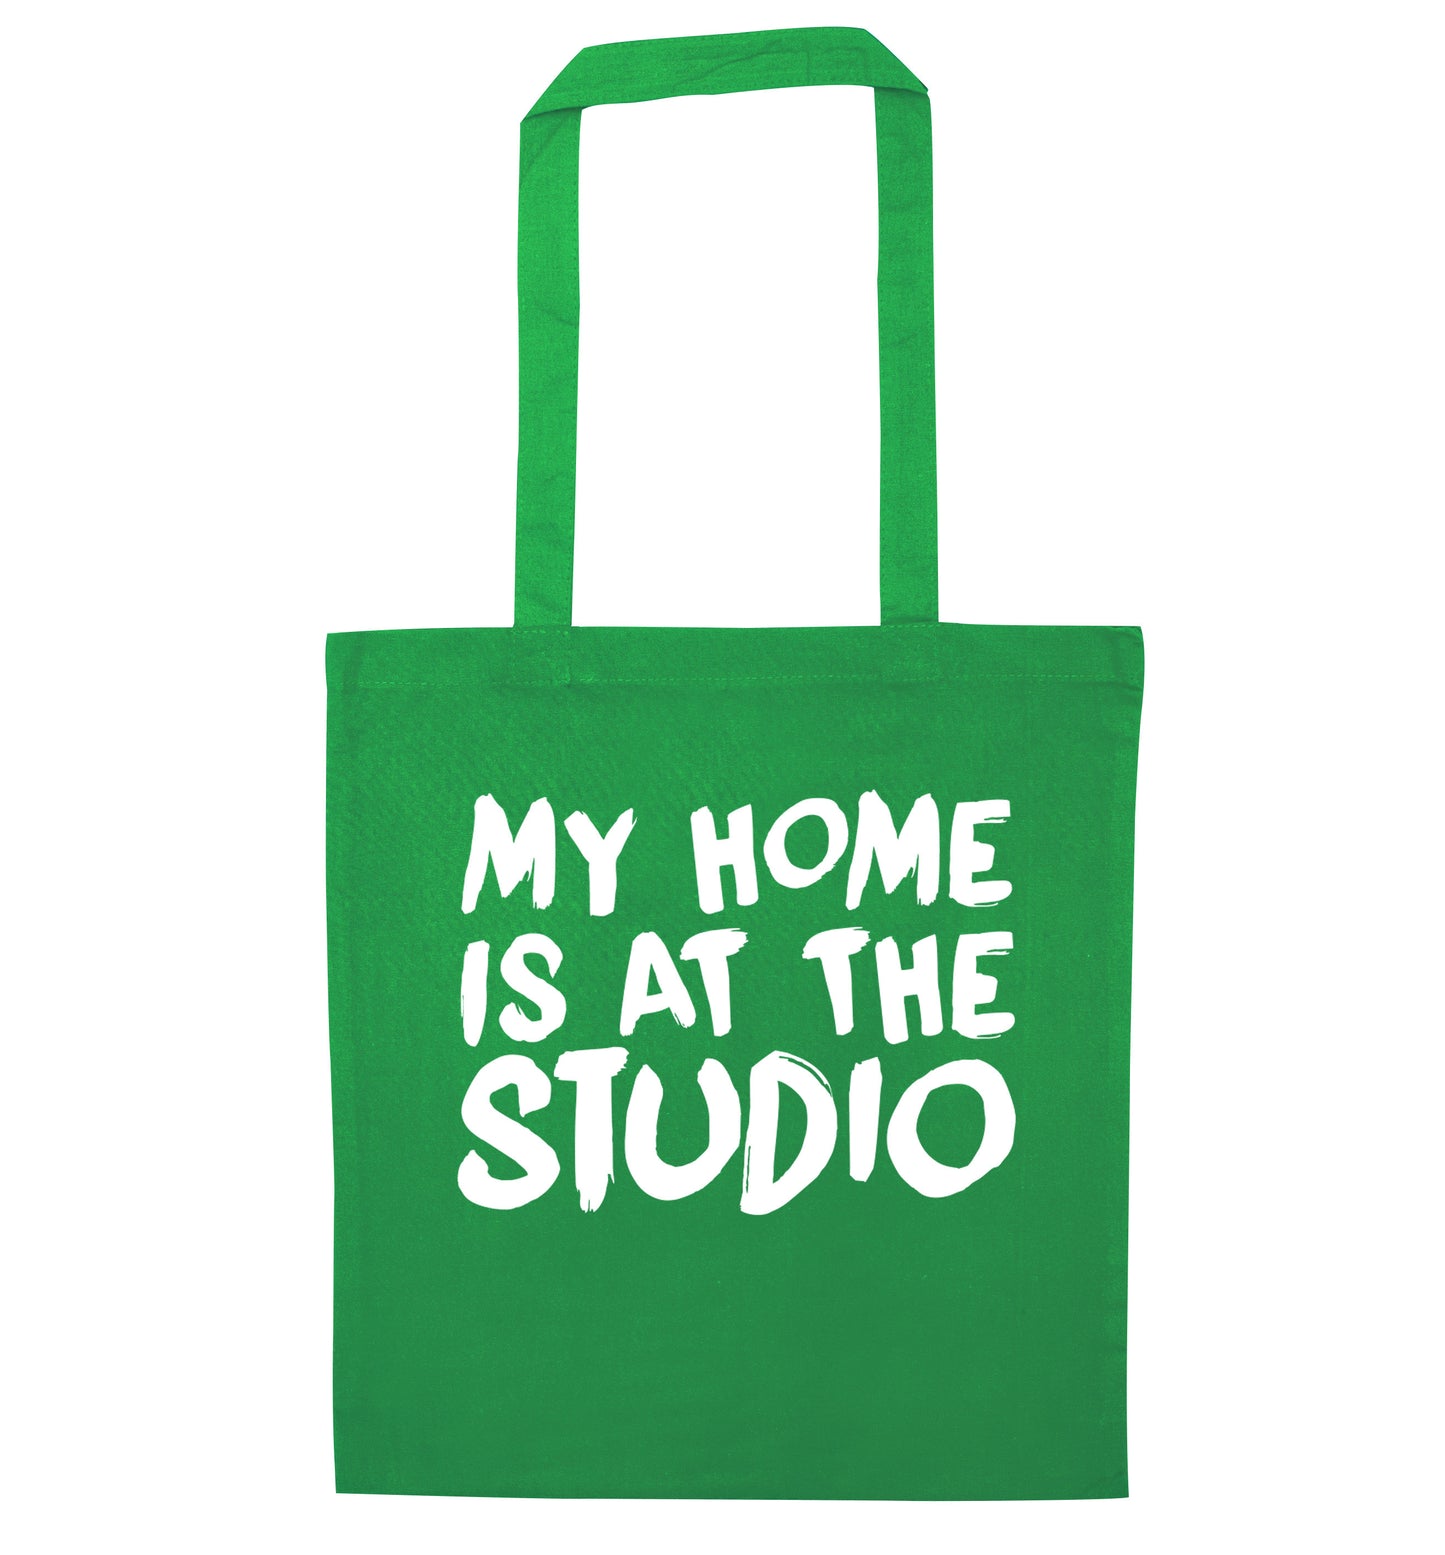 My home is at the studio green tote bag